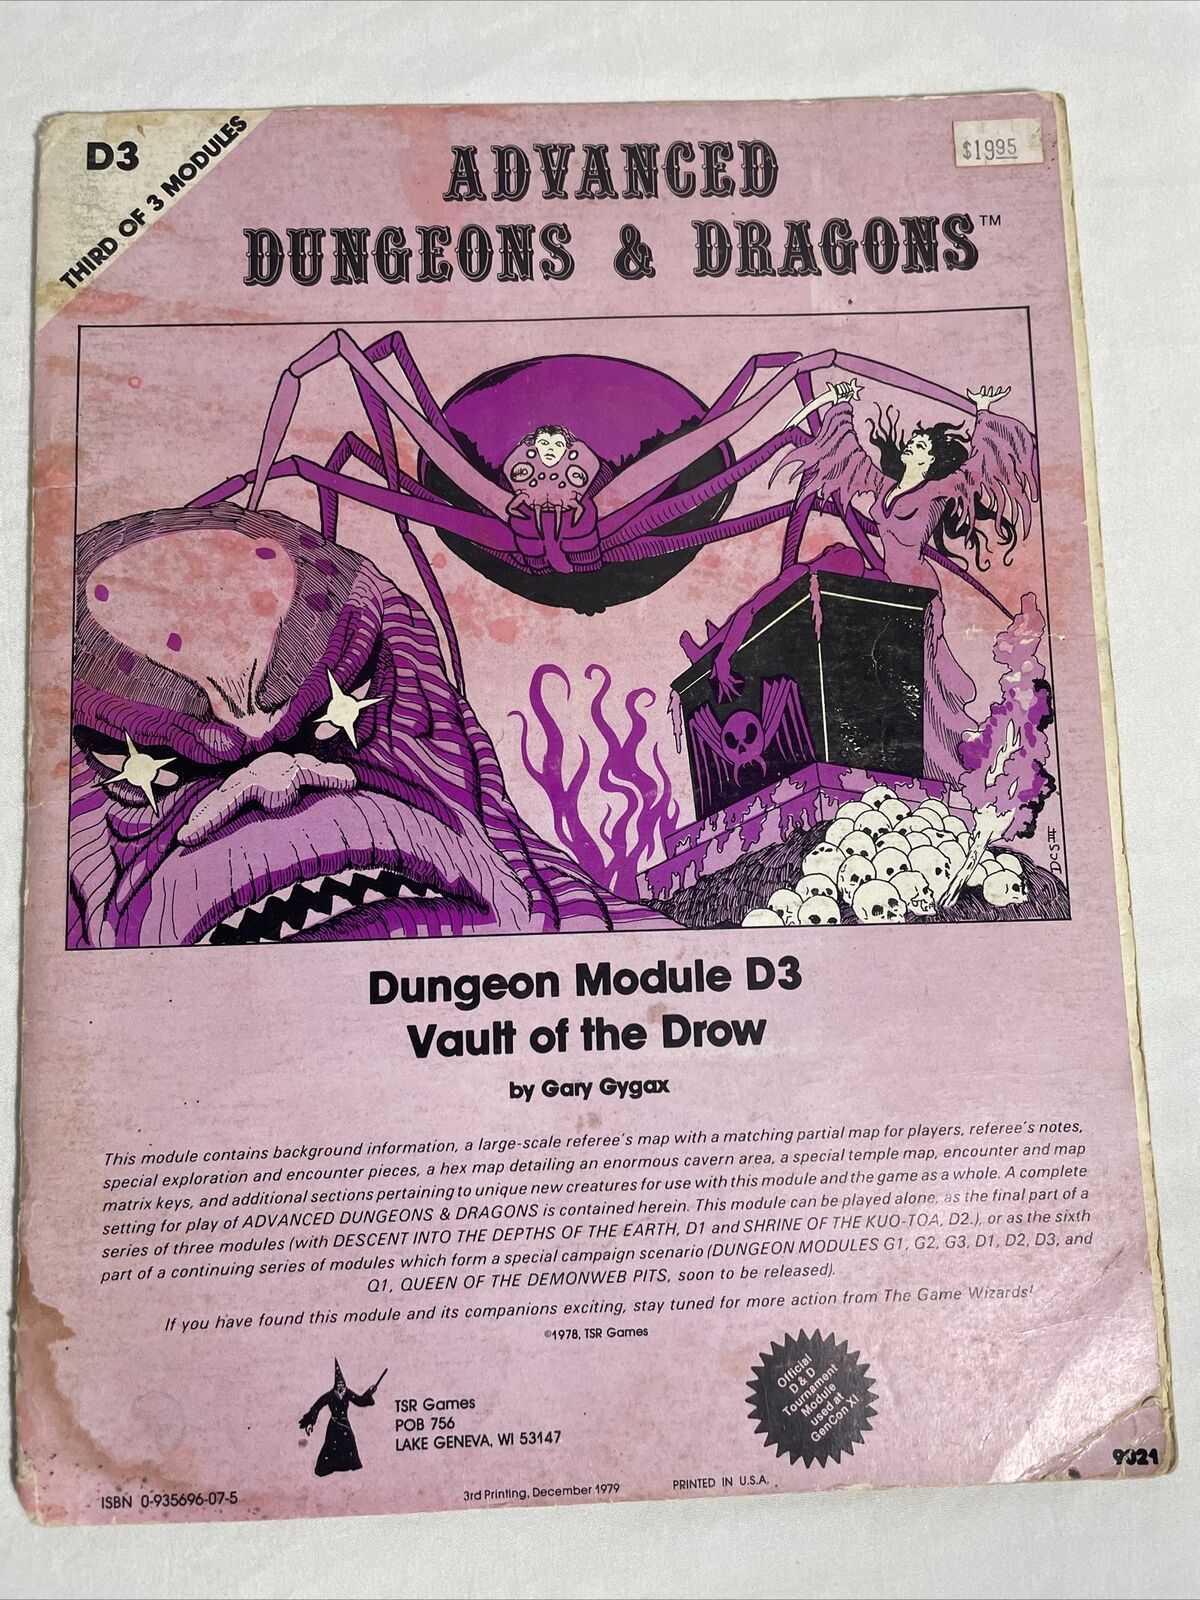 Advanced Dungeons & Dragons Module D3 Vault of the Drow by Gary Gygax Pink